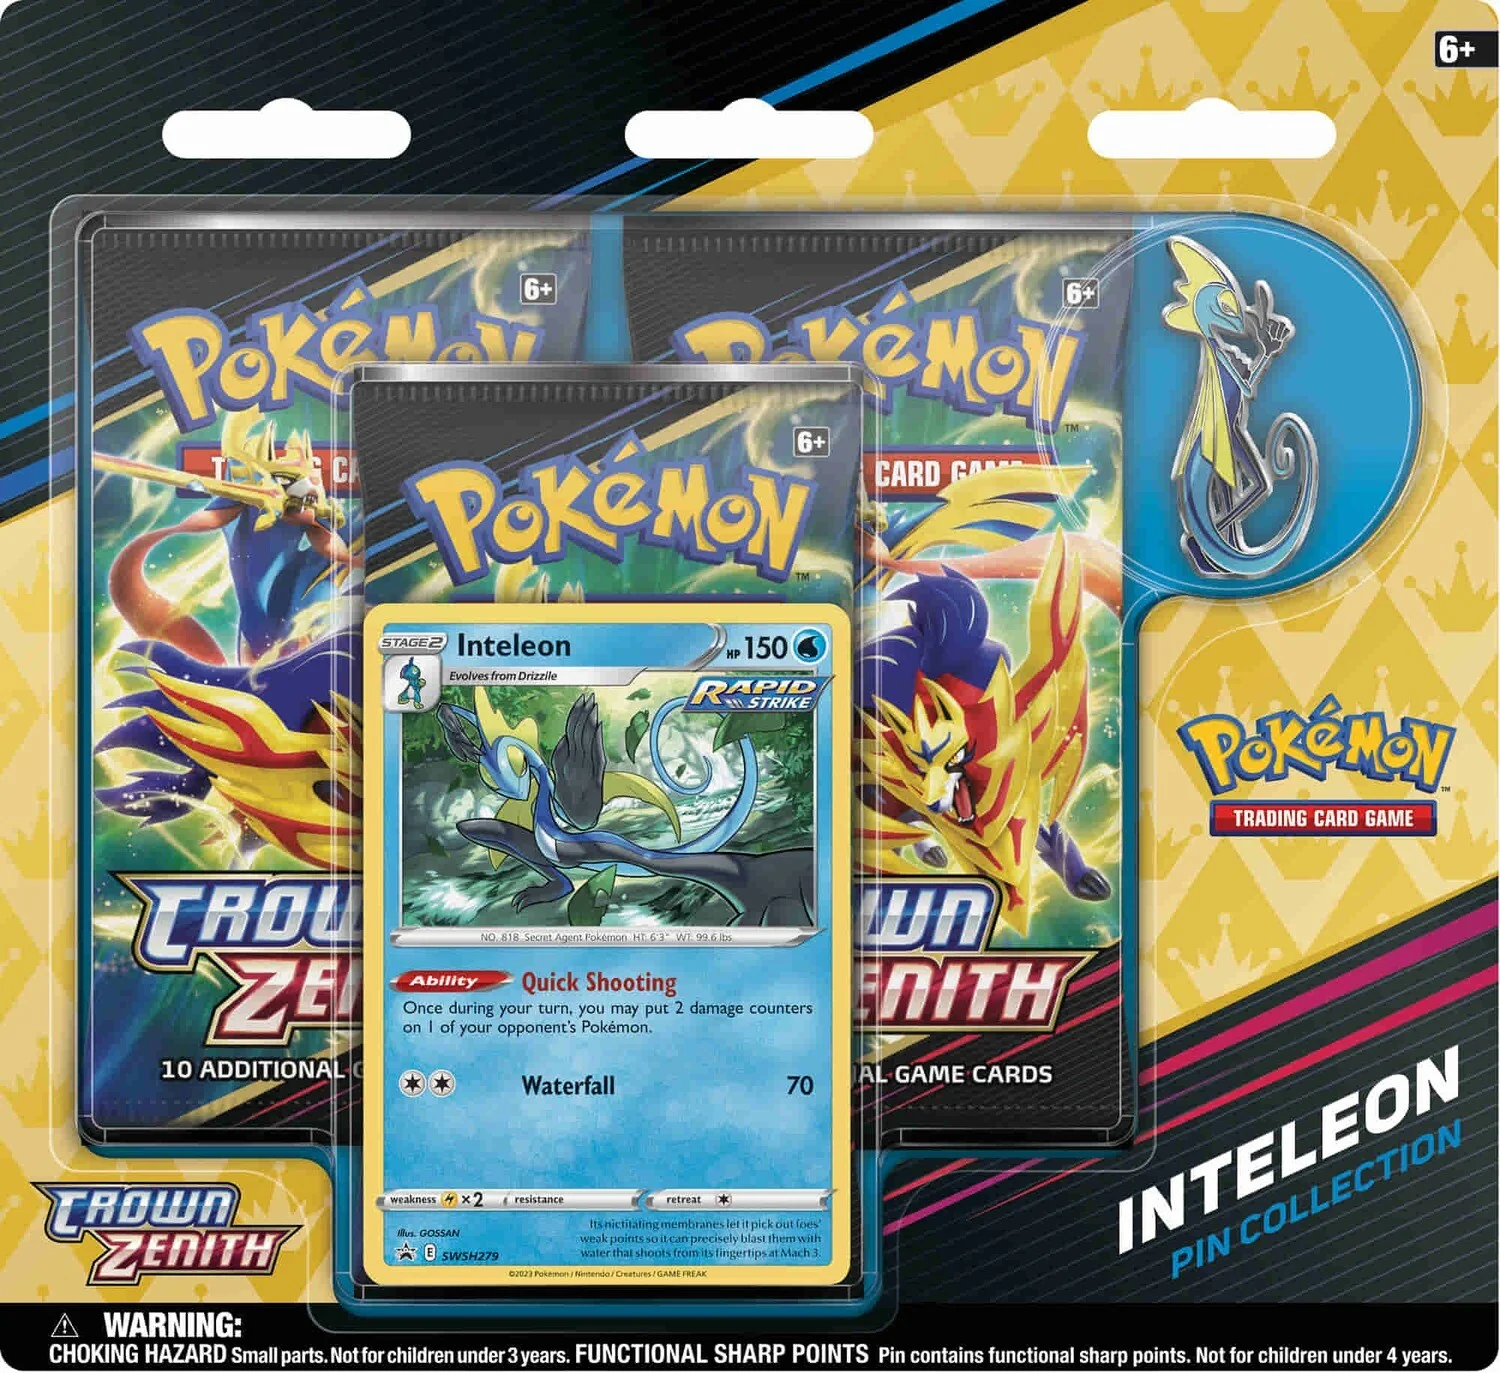 Pokémon Sword and Shield Crown Zenith - Inteleon Pin Collection - englisch